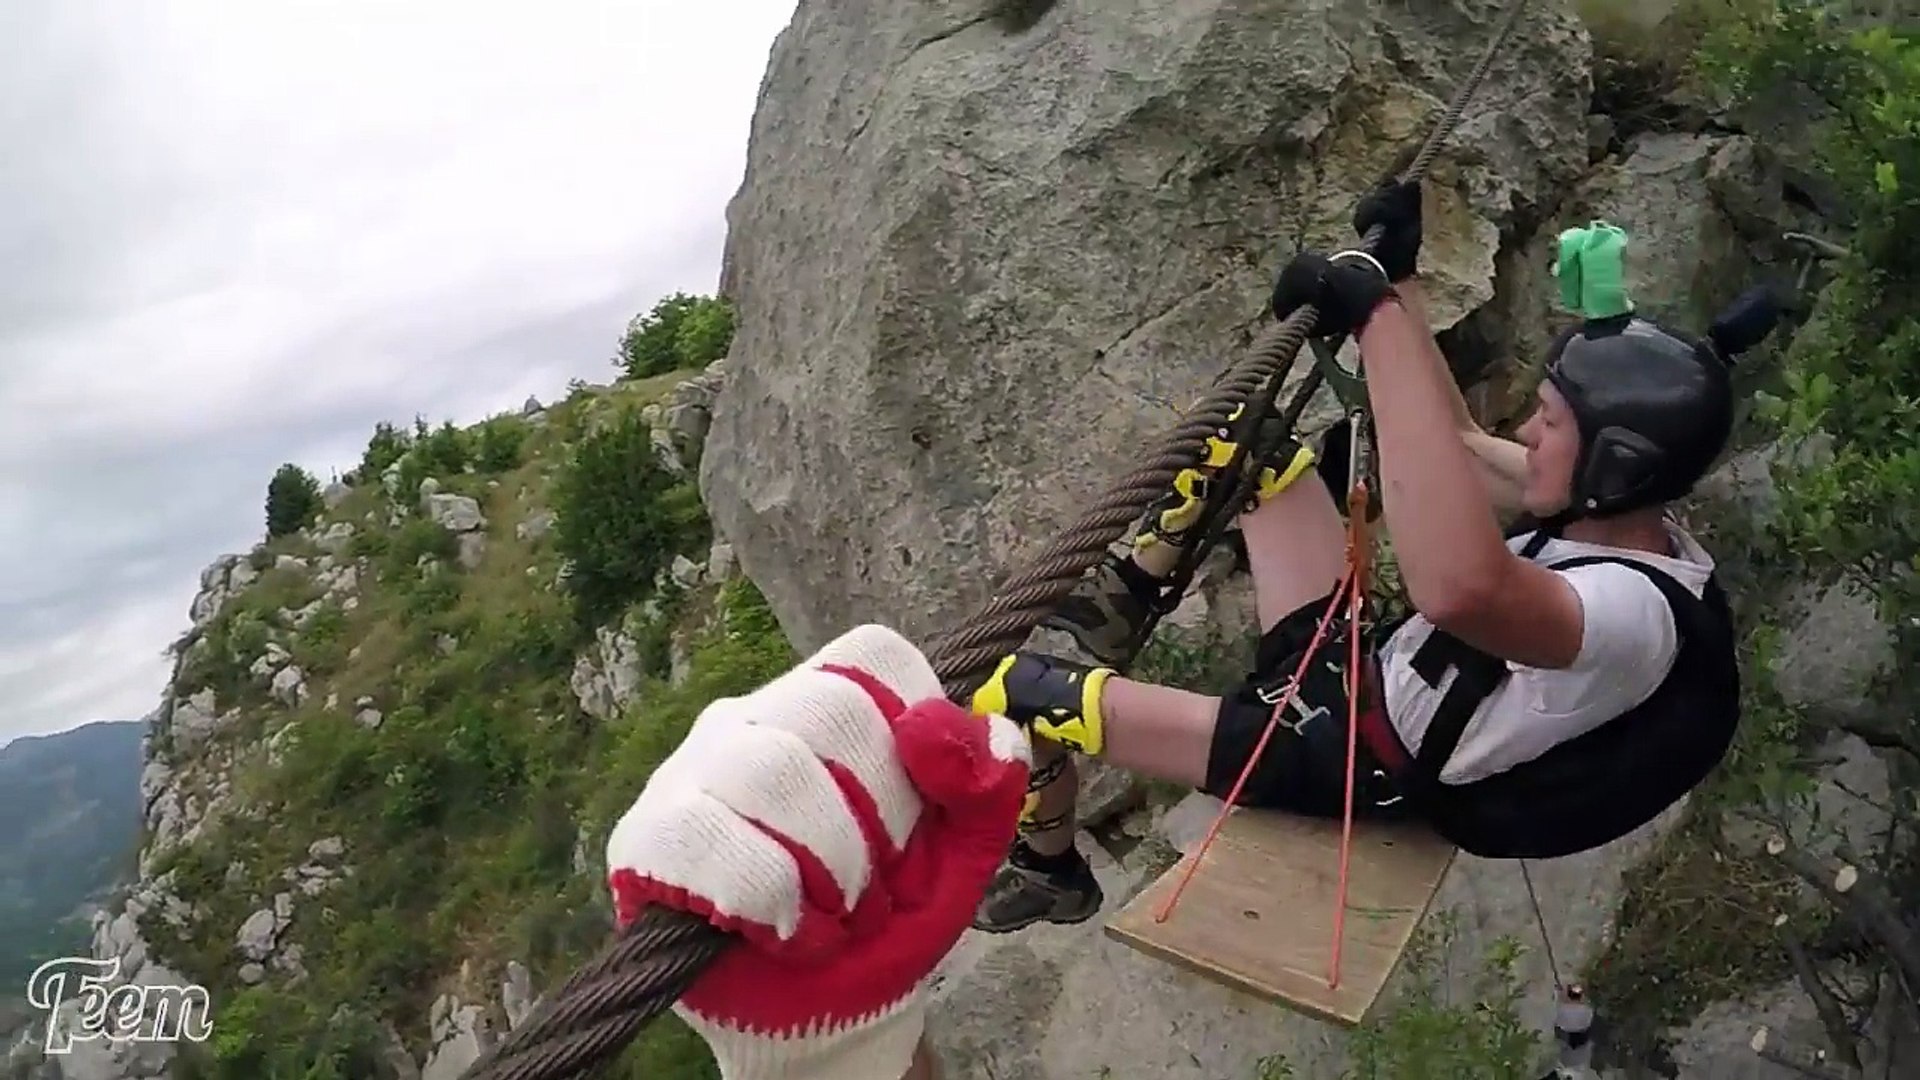 Friday Freakout Super Sketchy Zipline Base Jump Almost Loses Fingers Video Dailymotion